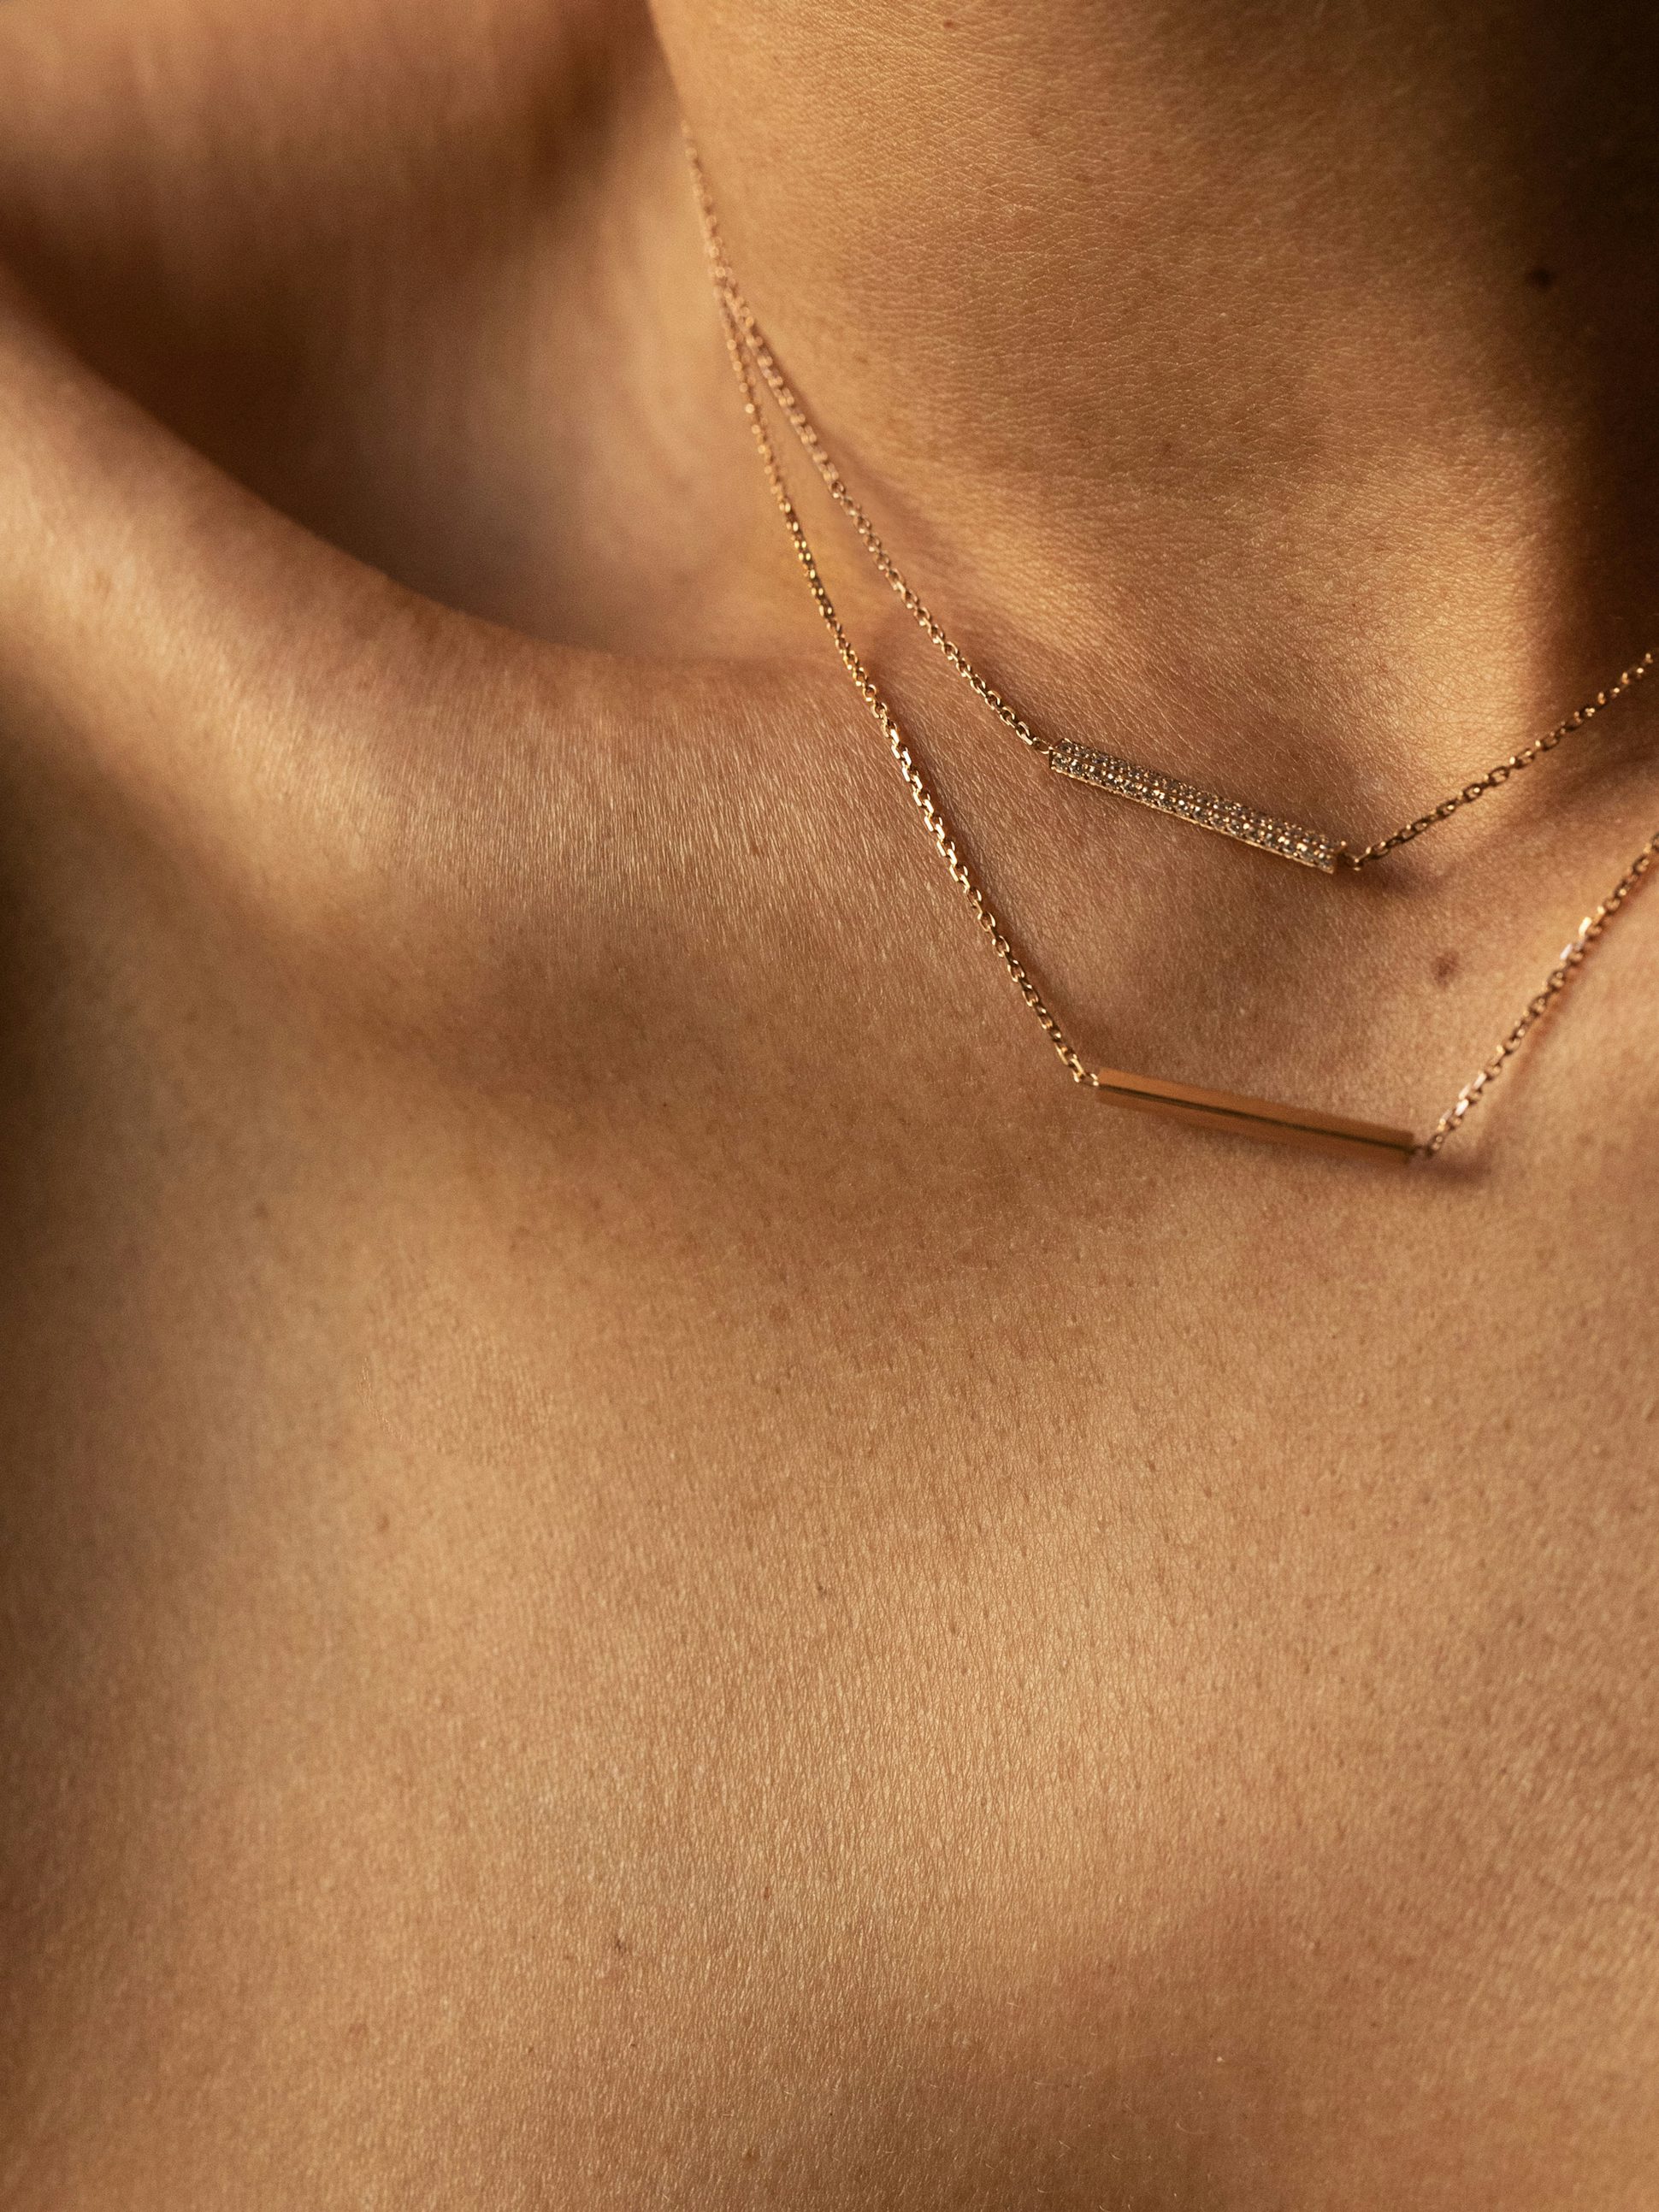 Motif Anagramme paved flat ribbon in rose gold 18k Fairmined ethical, on 42 cm chain